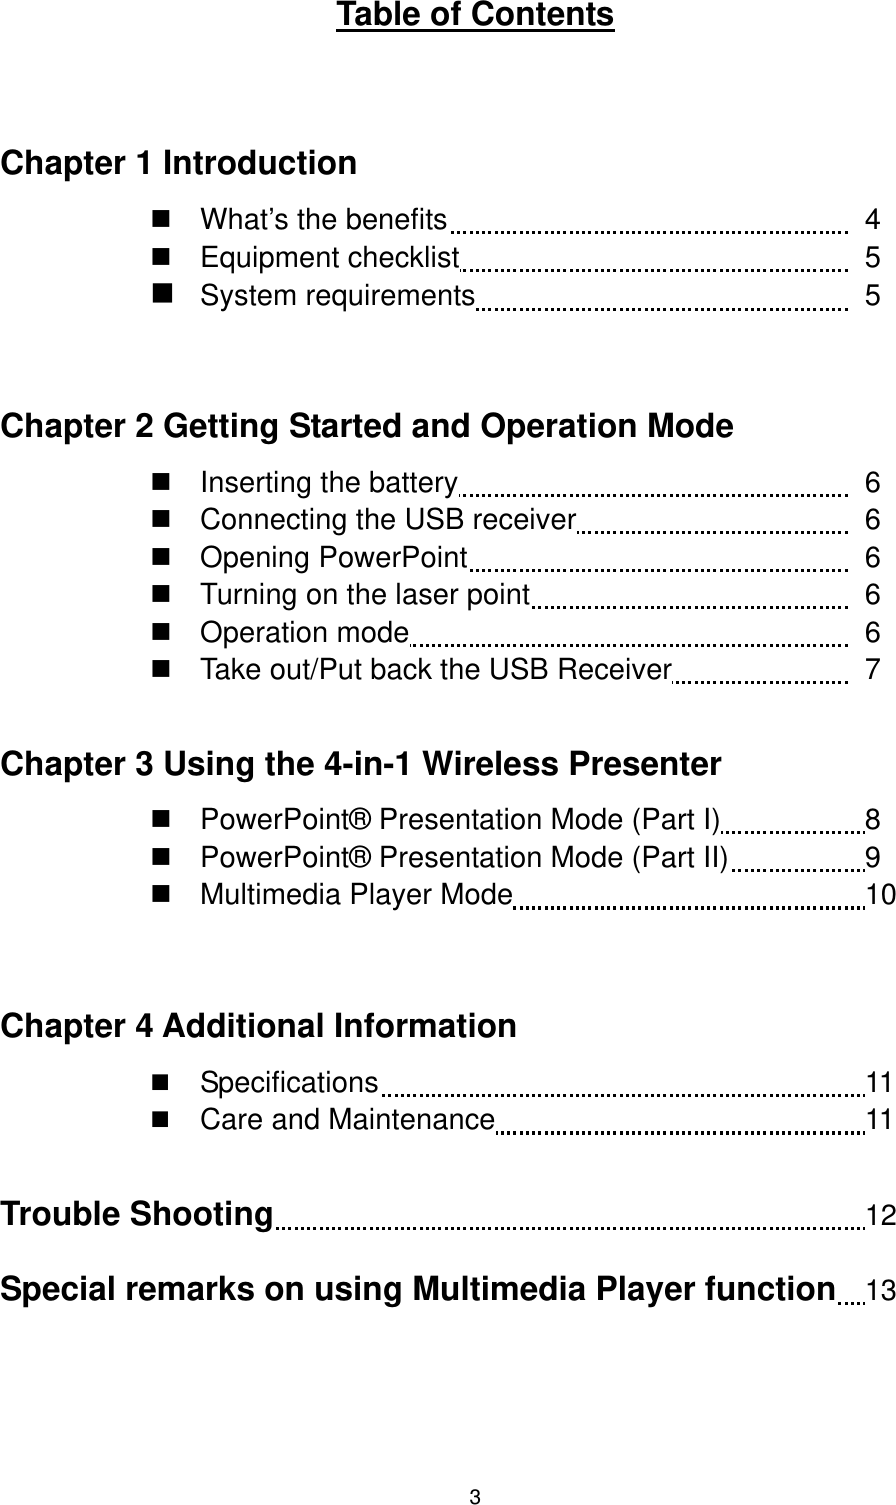   3UTable of Contents  Chapter 1 Introduction  What’s the benefits          4  Equipment checklist         5  System requirements         5  Chapter 2 Getting Started and Operation Mode  Inserting the battery         6  Connecting the USB receiver       6  Opening PowerPoint         6  Turning on the laser point        6  Operation mode          6  Take out/Put back the USB Receiver         7  Chapter 3 Using the 4-in-1 Wireless Presenter  PowerPoint® Presentation Mode (Part I)        8  PowerPoint® Presentation Mode (Part II)        9  Multimedia Player Mode                 10  Chapter 4 Additional Information   Specifications           11   Care and Maintenance         11  Trouble Shooting                                      12 Special remarks on using Multimedia Player function  13   